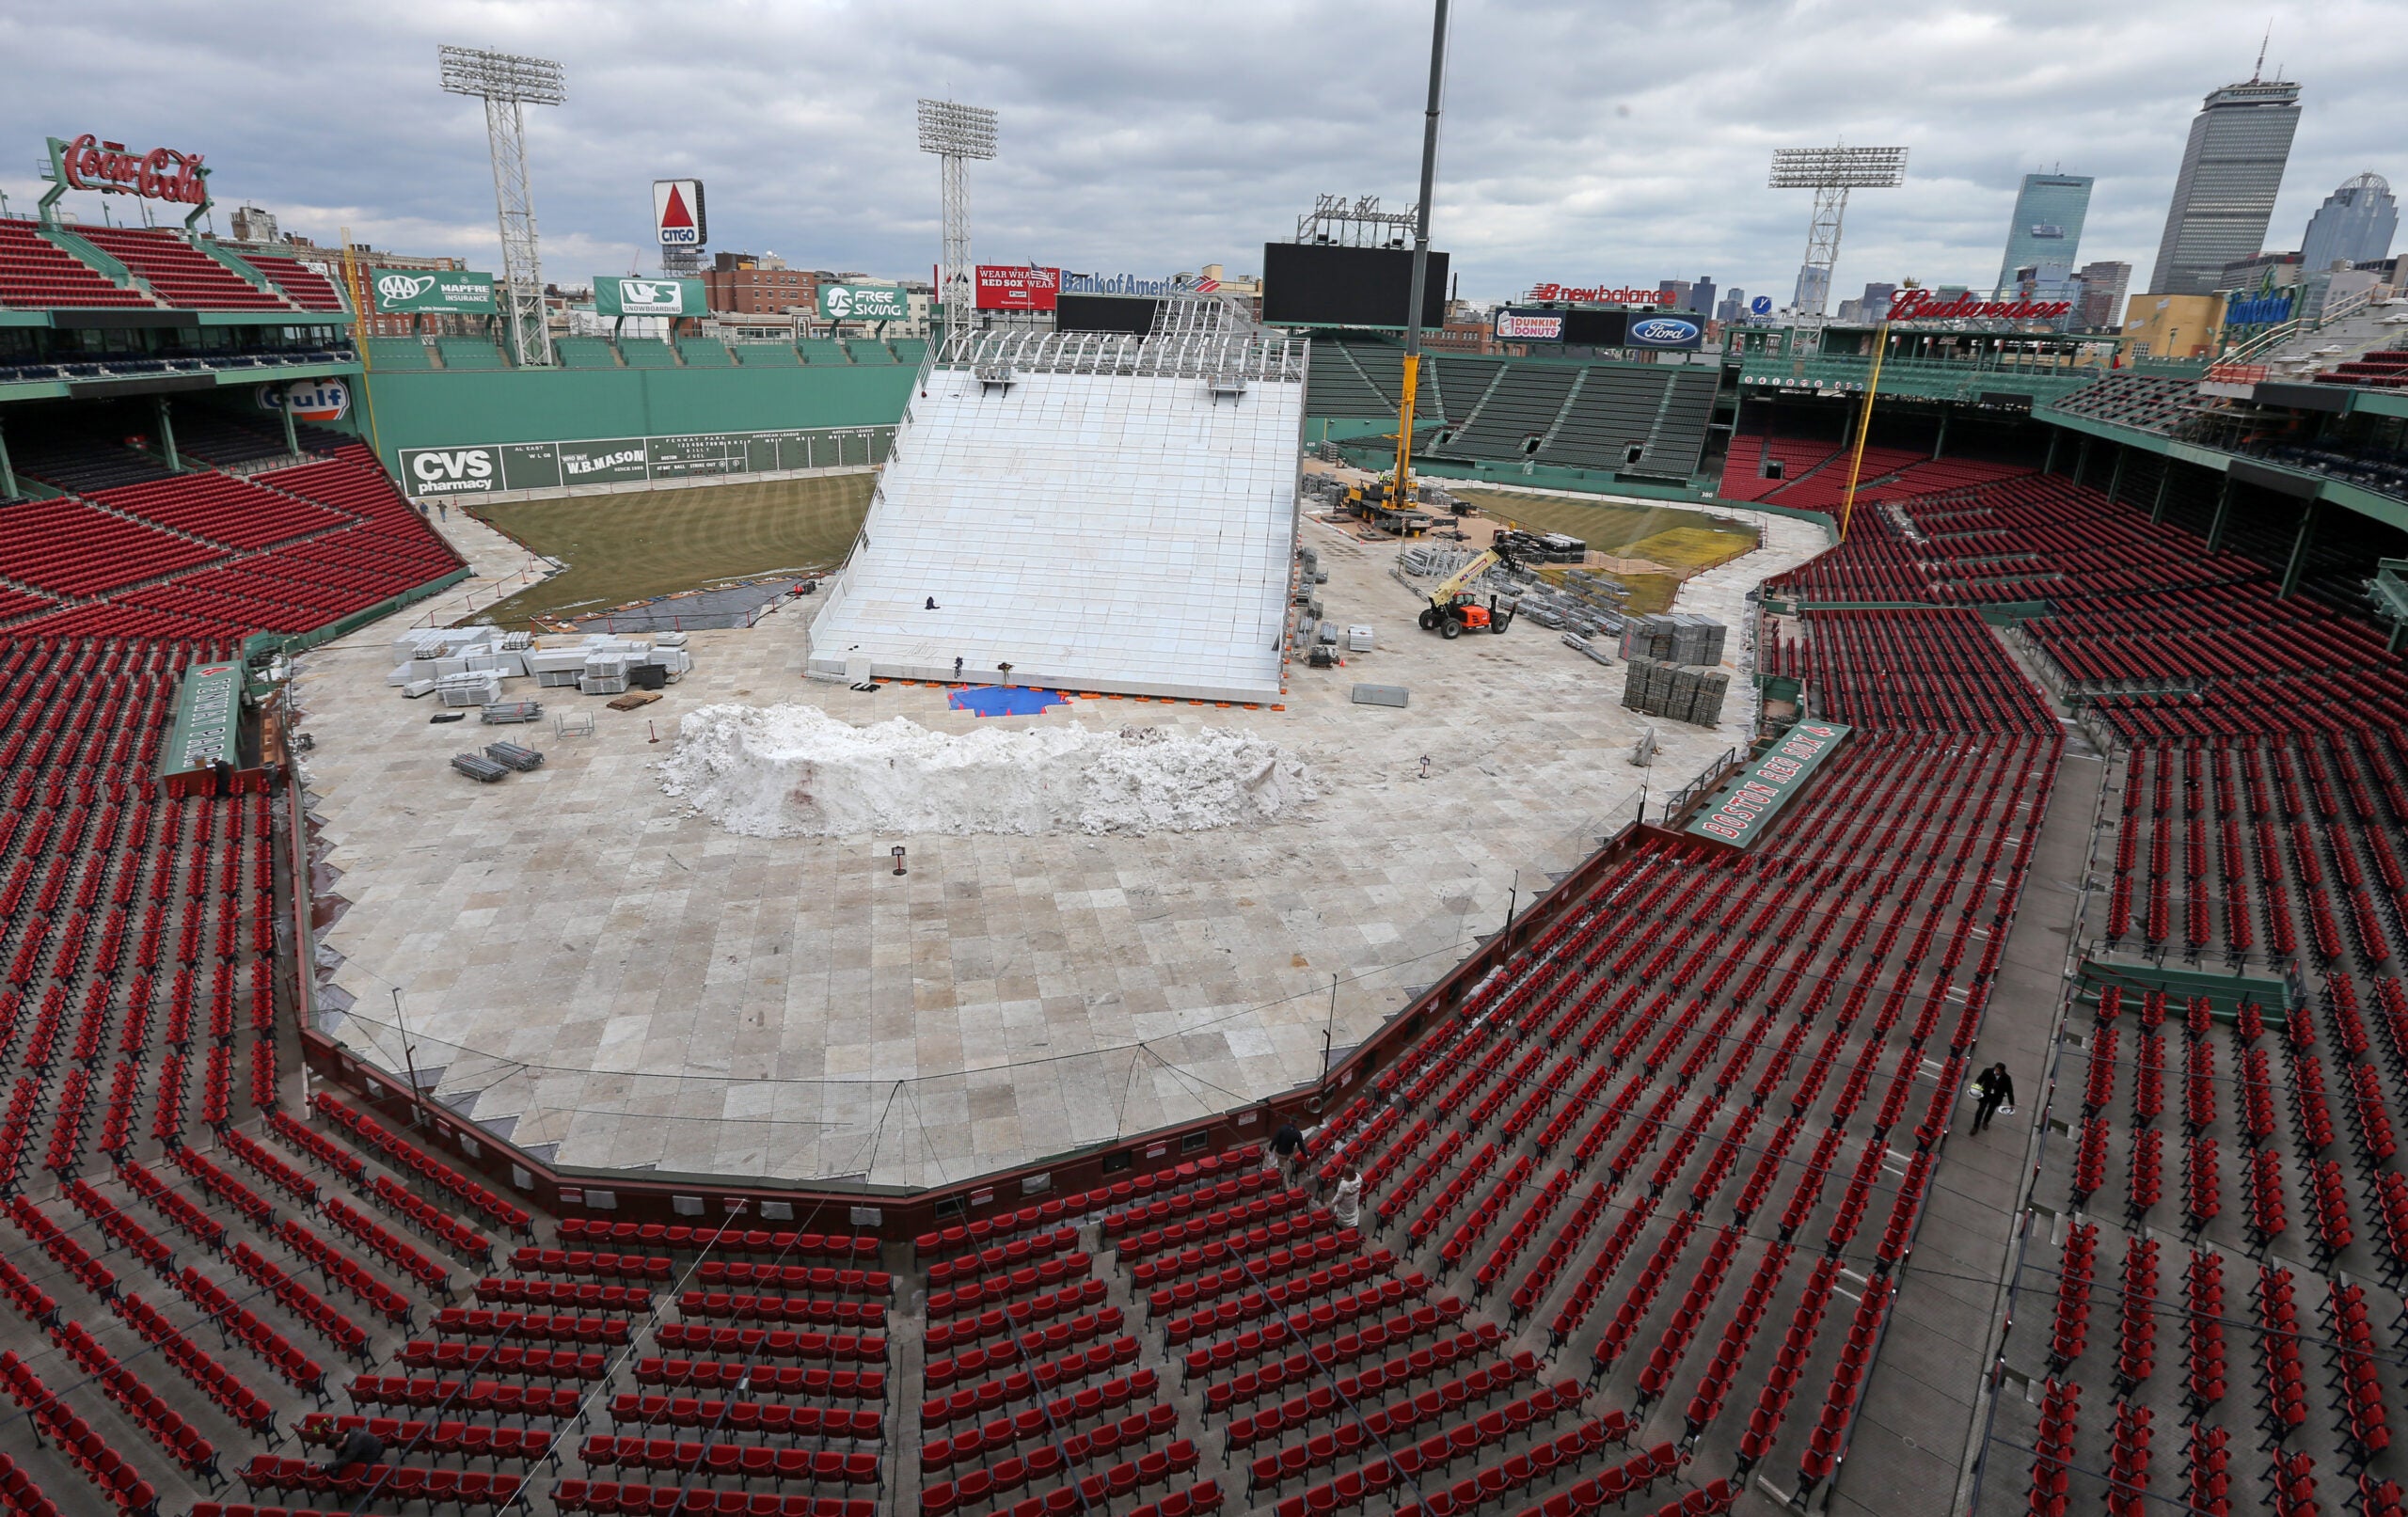 This huge snow ramp in Fenway Park is 4 times as tall as the Green